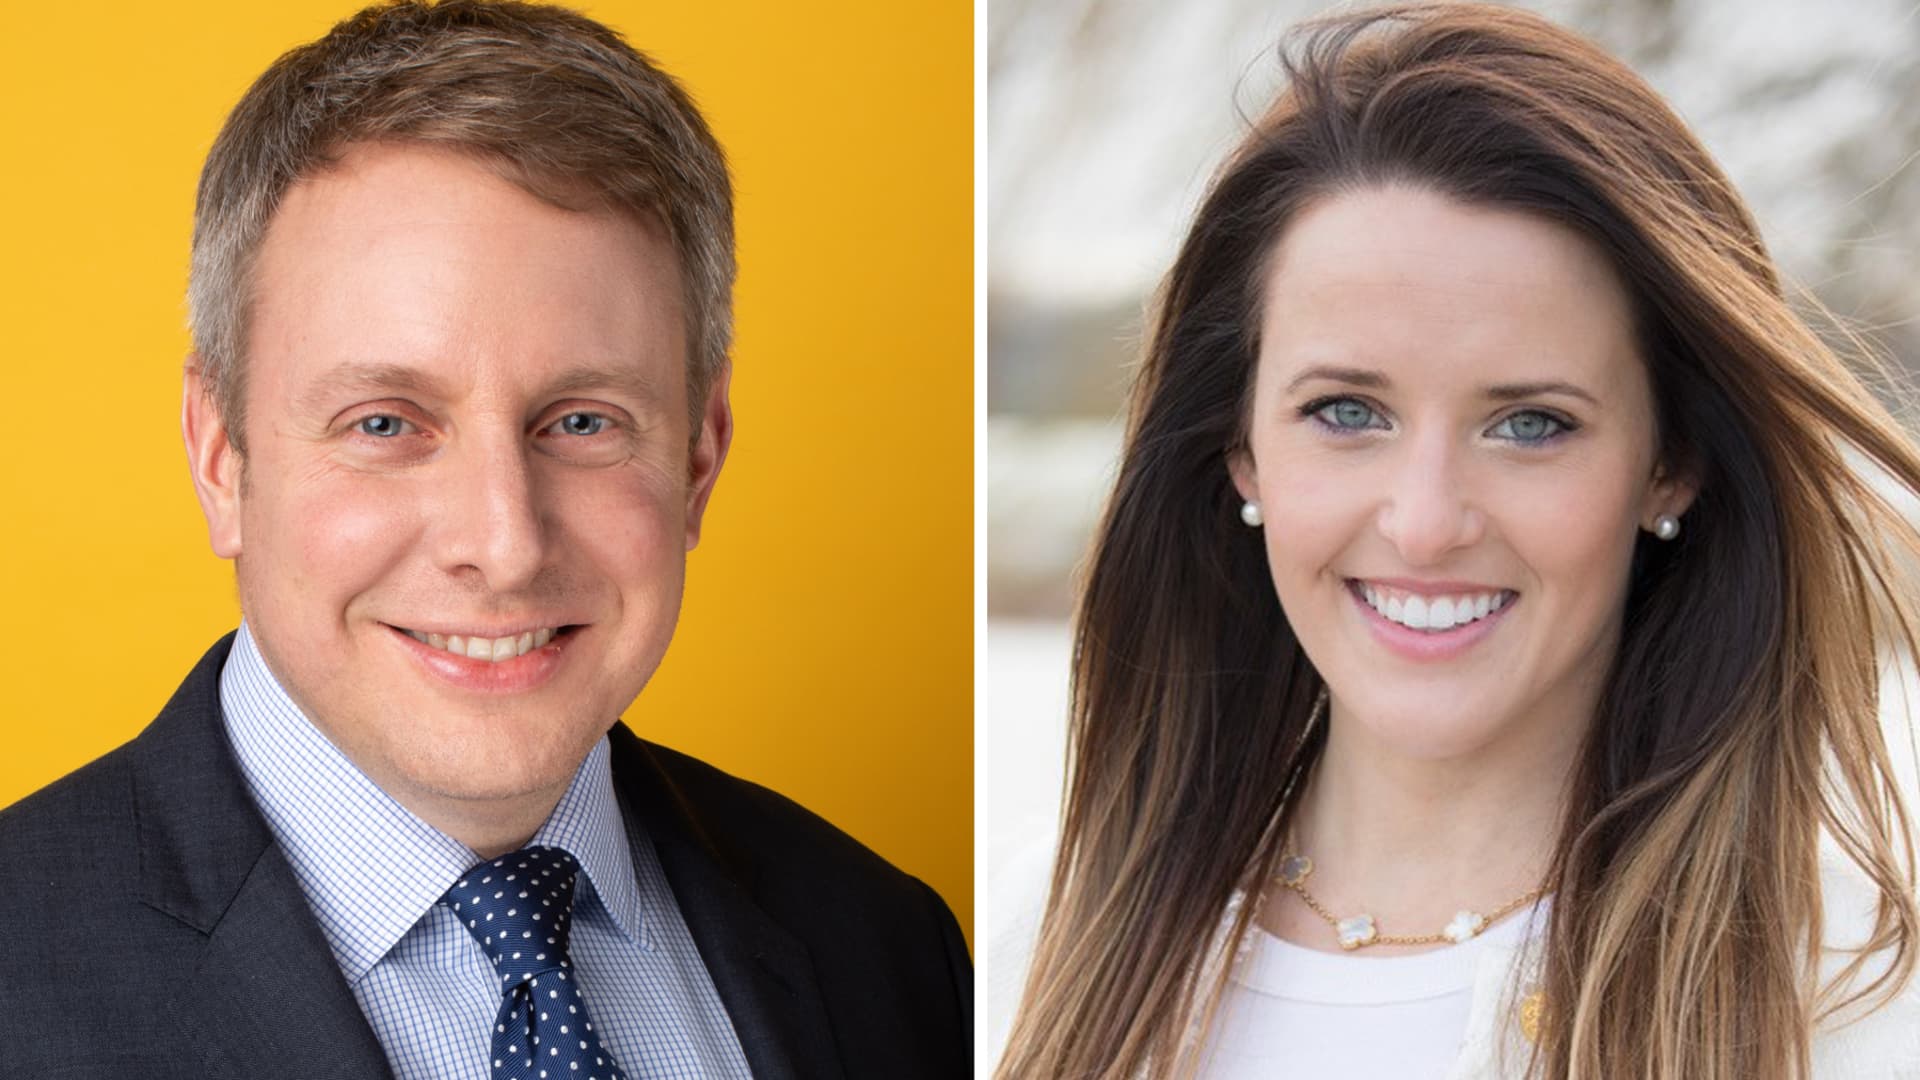 Ford Motor Company today announced that Alexandra Ford English and Henry Ford III have been nominated to stand for election to the company's board of directors at its annual meeting of shareholders on May 13.